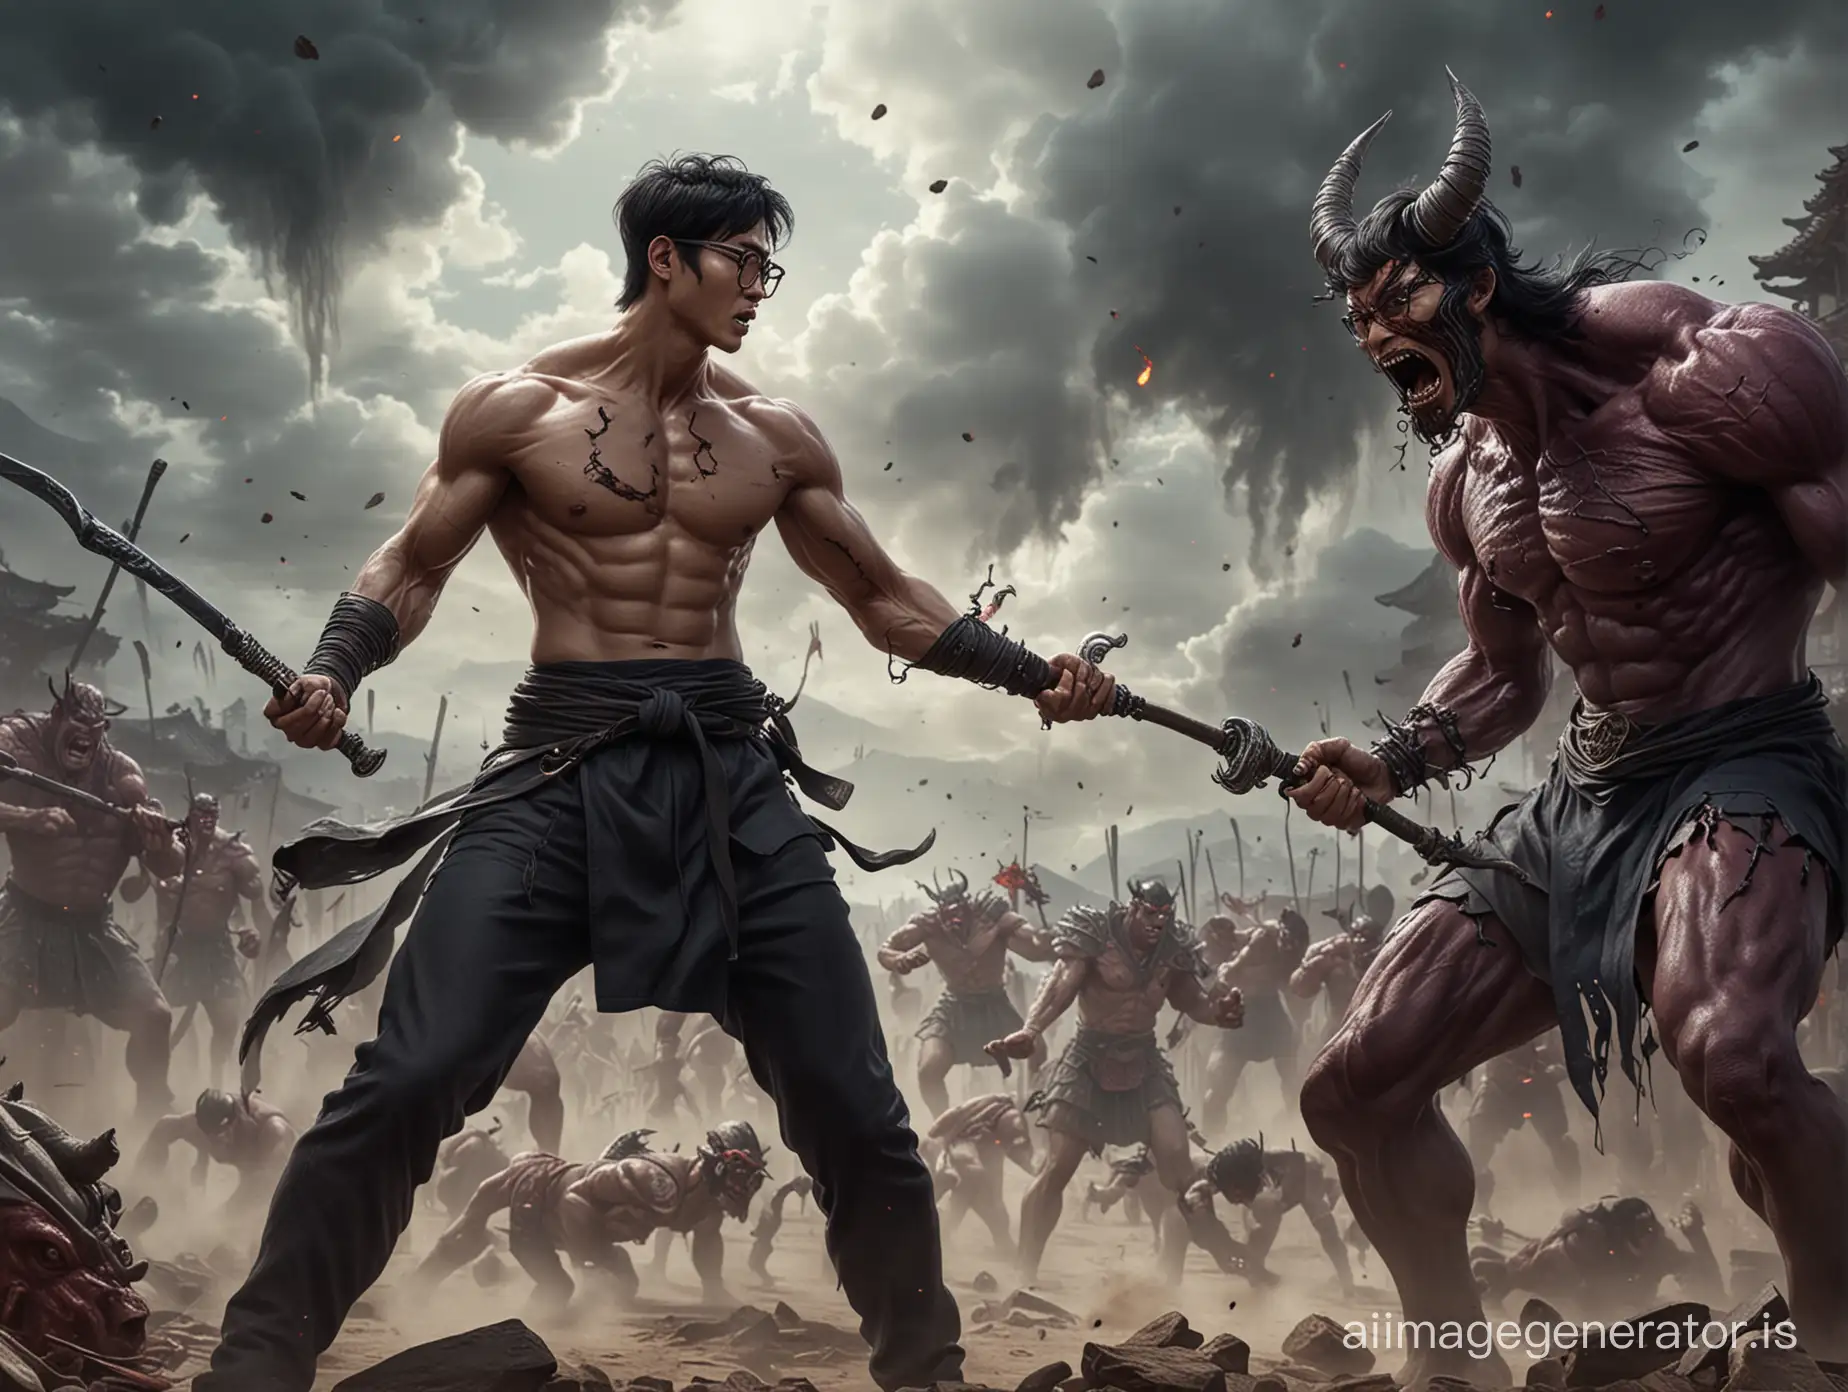 A skinny Korean with black hair and glasses battles a demon. The demon is the master of vape, sweet smoke, and hookahs. An epic battle between them. The Korean is good. The demon is evil. This is the most epic battle in the entire galaxy. The fate of the world depends on it. There is a lot of grape juice around. The Korean opposes evil and fights for a healthy lifestyle and self-improvement. From afar, a large battlefield is visible. And on two sides stand the Korean and the demon, who are fighting.